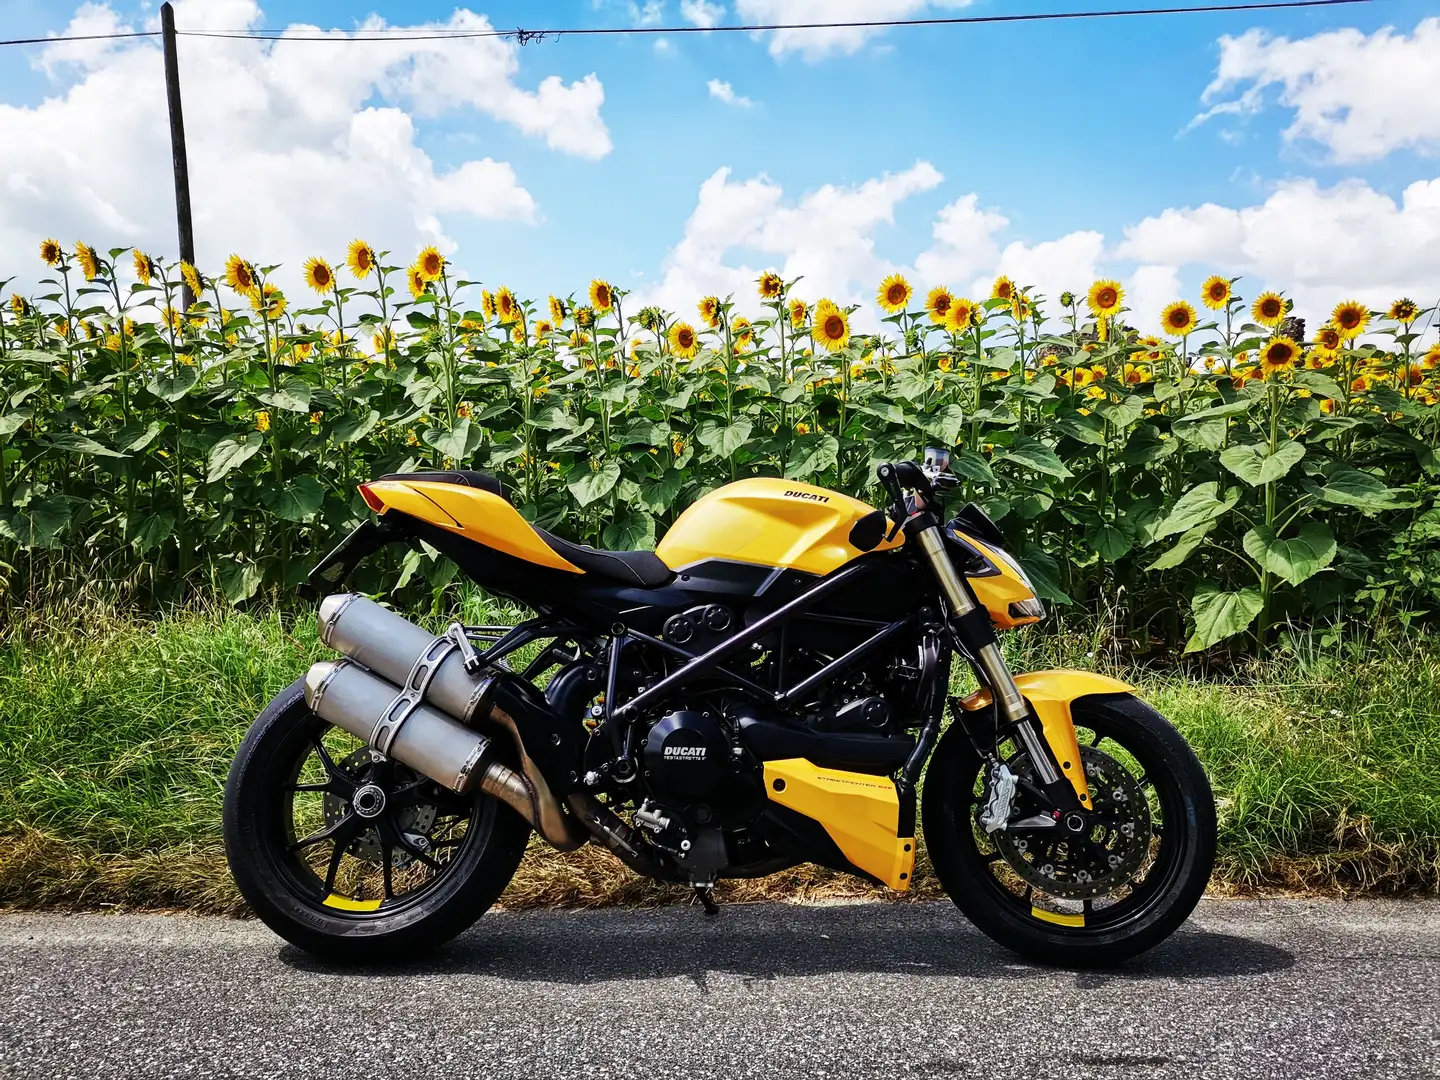 Ducati Streetfighter 848 Amg Special Edition Yellow - 2